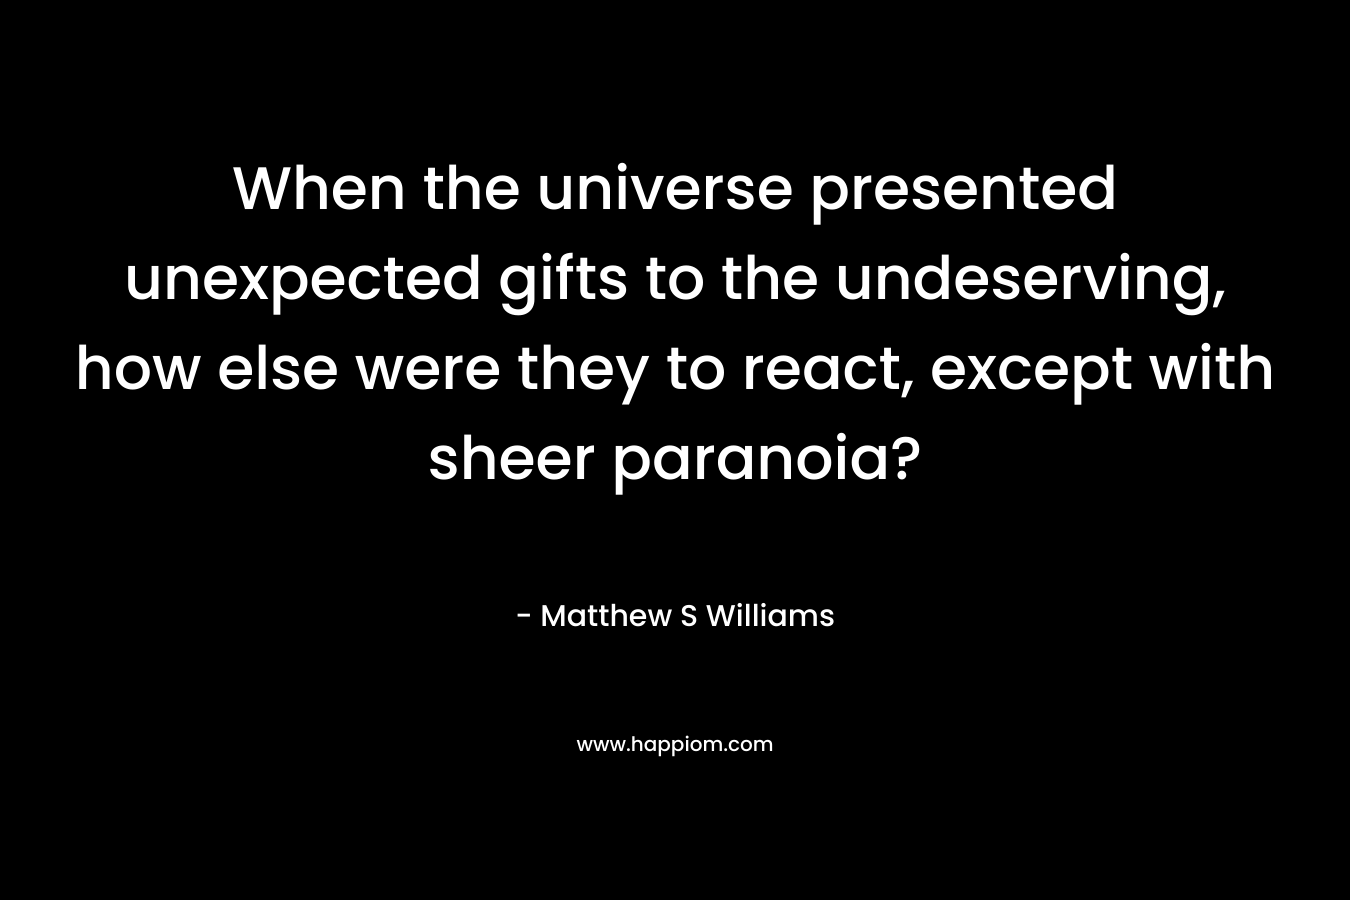 When the universe presented unexpected gifts to the undeserving, how else were they to react, except with sheer paranoia?